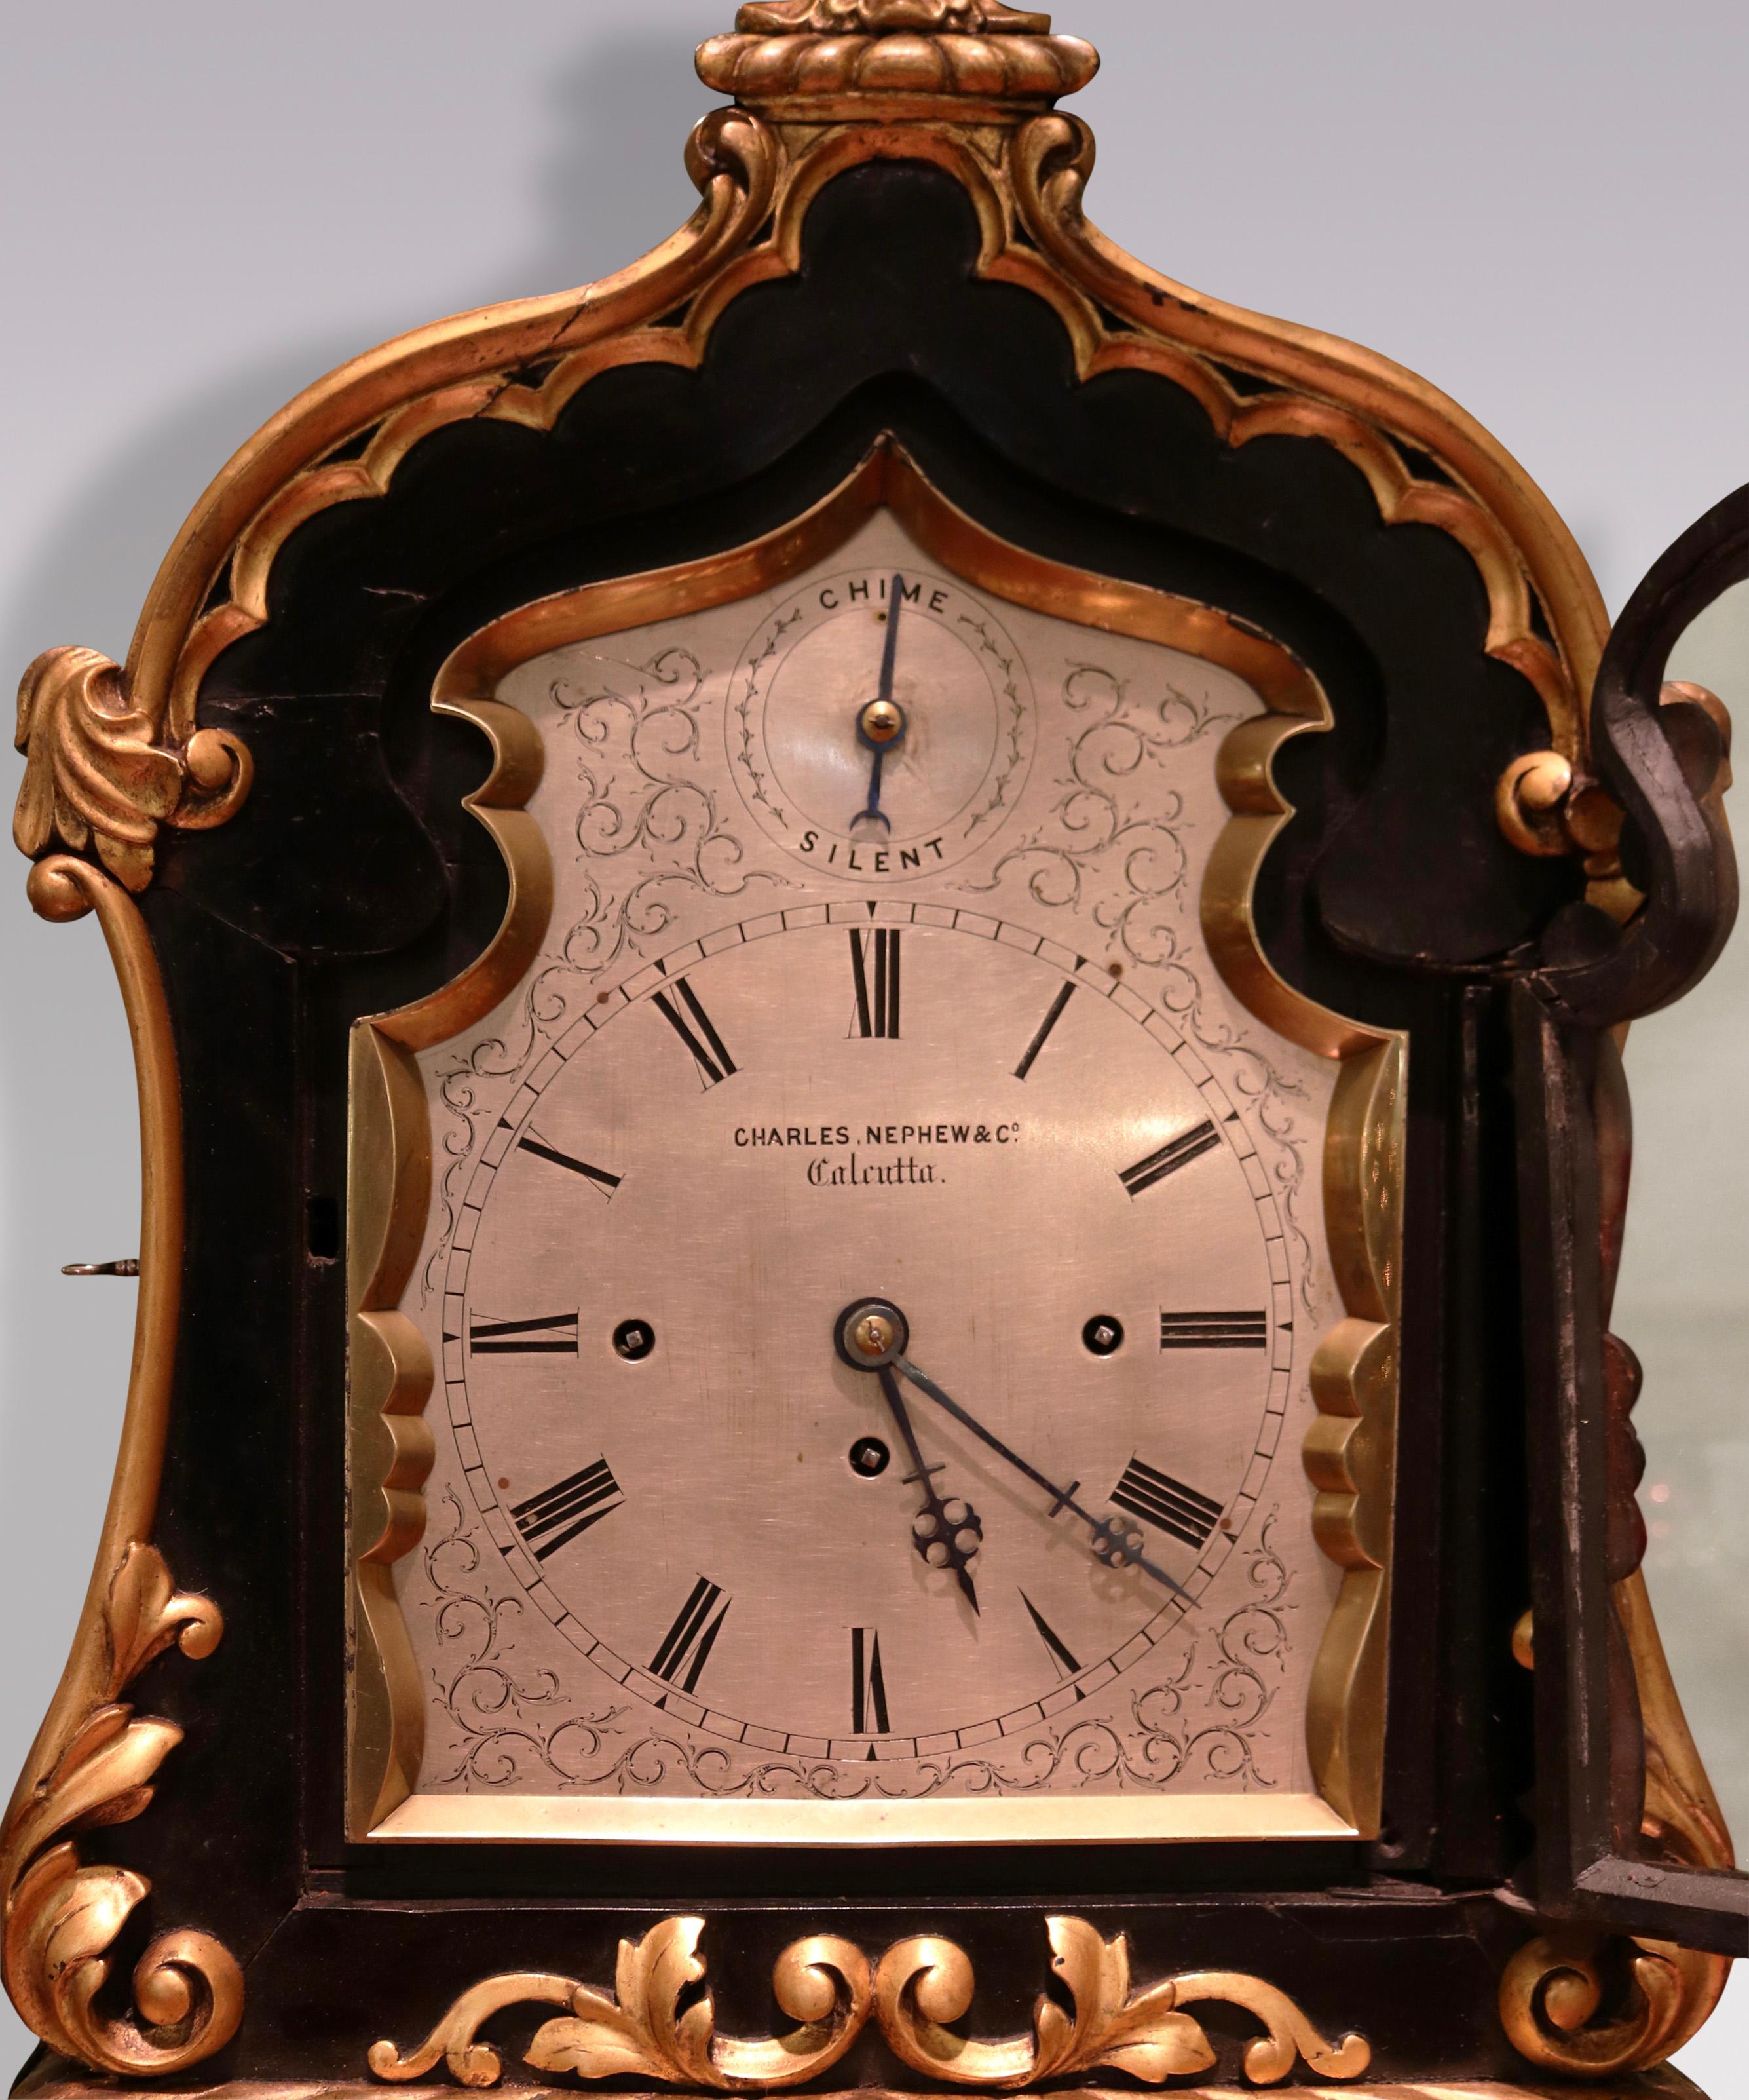 A rare mid 19th Century Bracket Clock of unusual large proportions, the silvered dial 8-day quarter repeat movement striking on bells and gong, by Charles. Nephew & Co, Calcutta.  The Clock housed in ebonised and acanthus carved giltwood ‘Indian